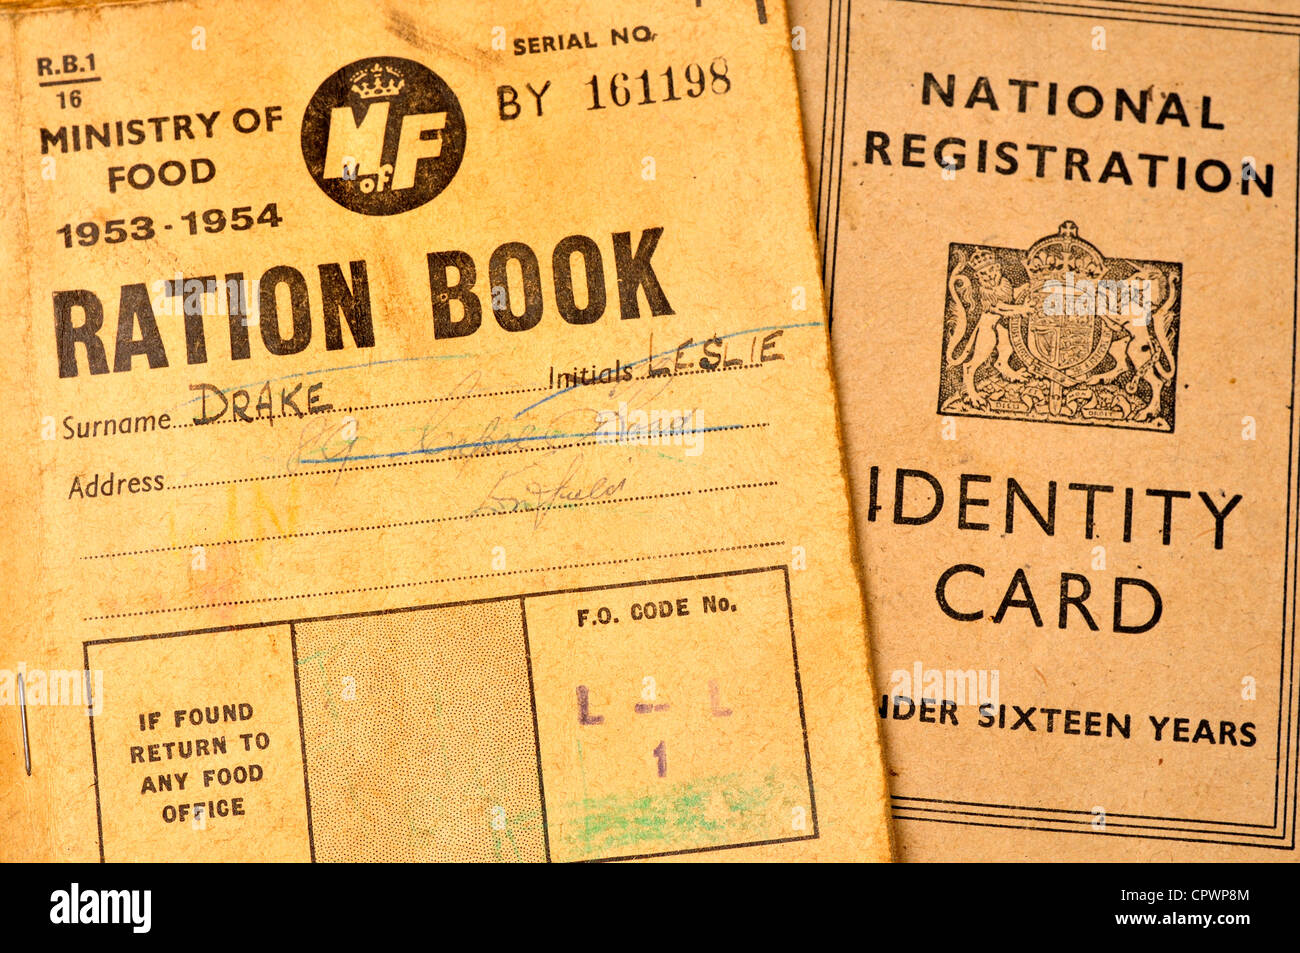 Post World War 2 ration book and identity card Stock Photo